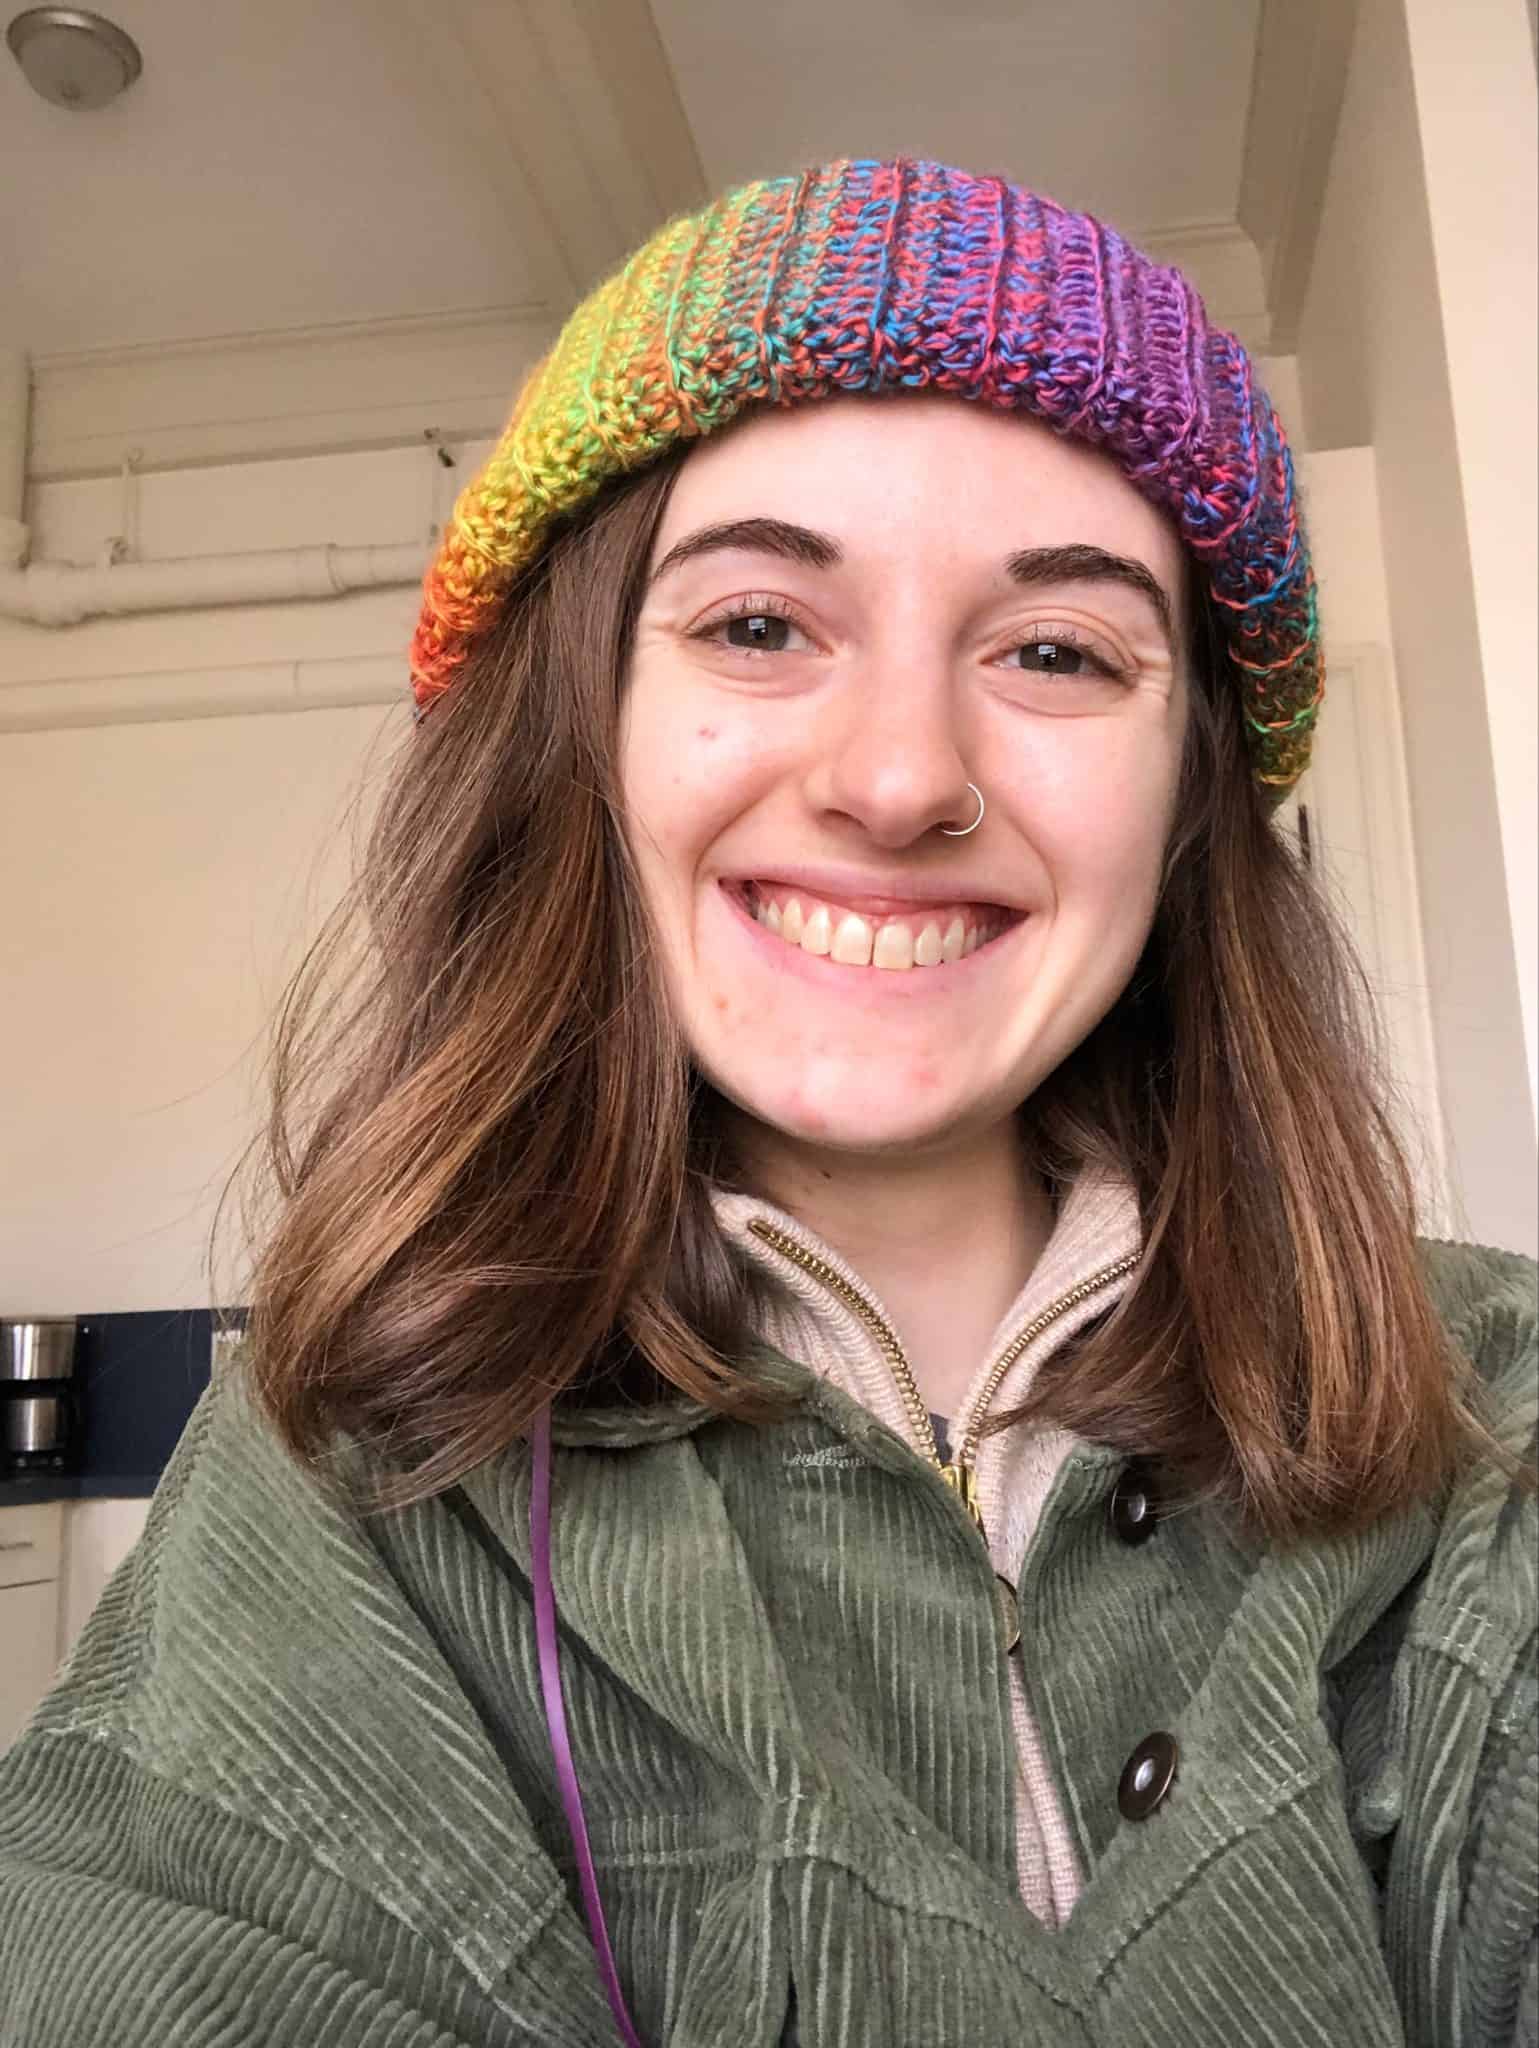 Maya smiles at the camera. She has straight brown shoulder-length hair. She wear a rainbow knitted beanie and a forest green jacket. 